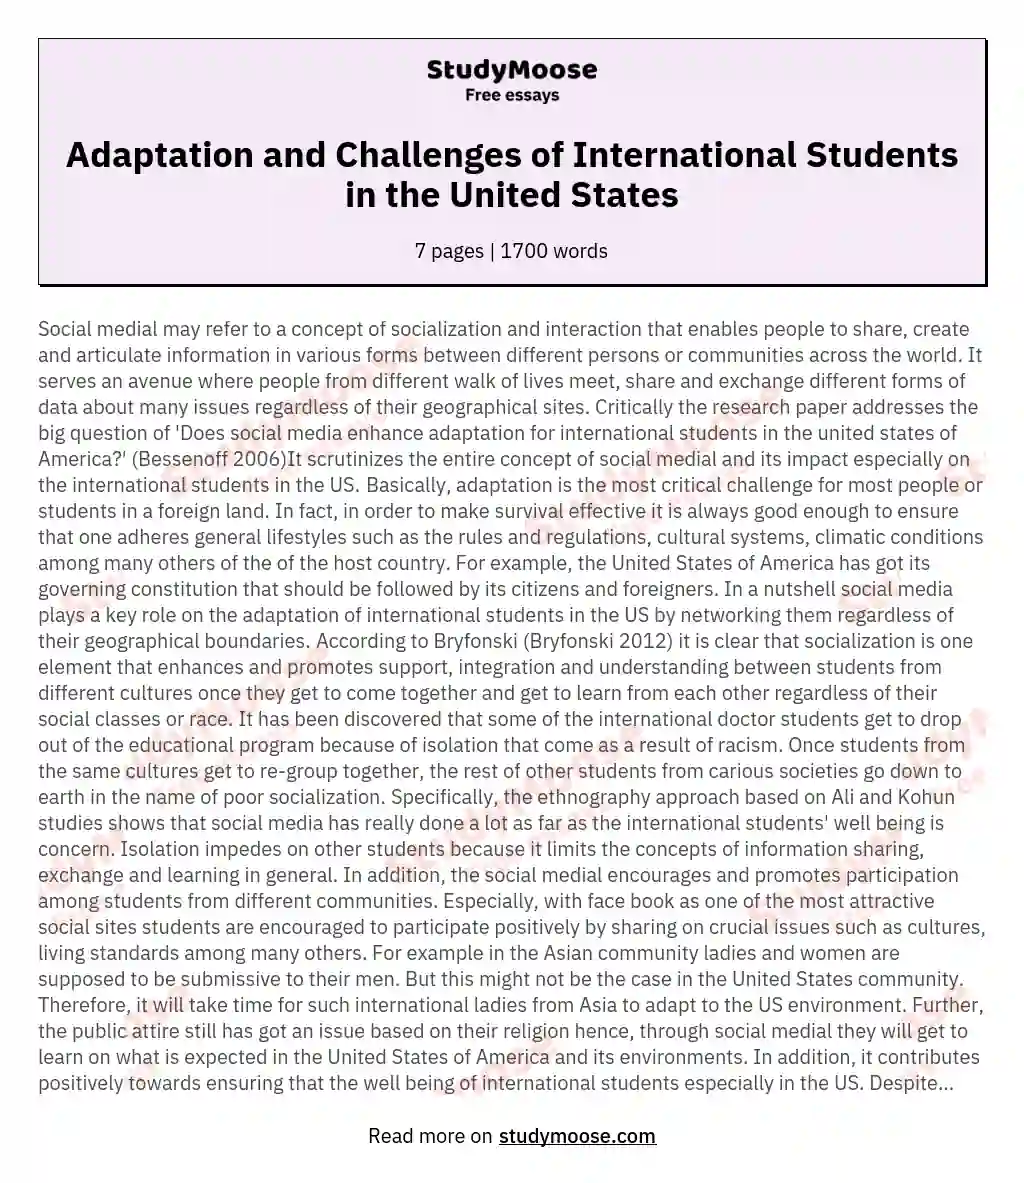 Adaptation and Challenges of International Students in the United States essay